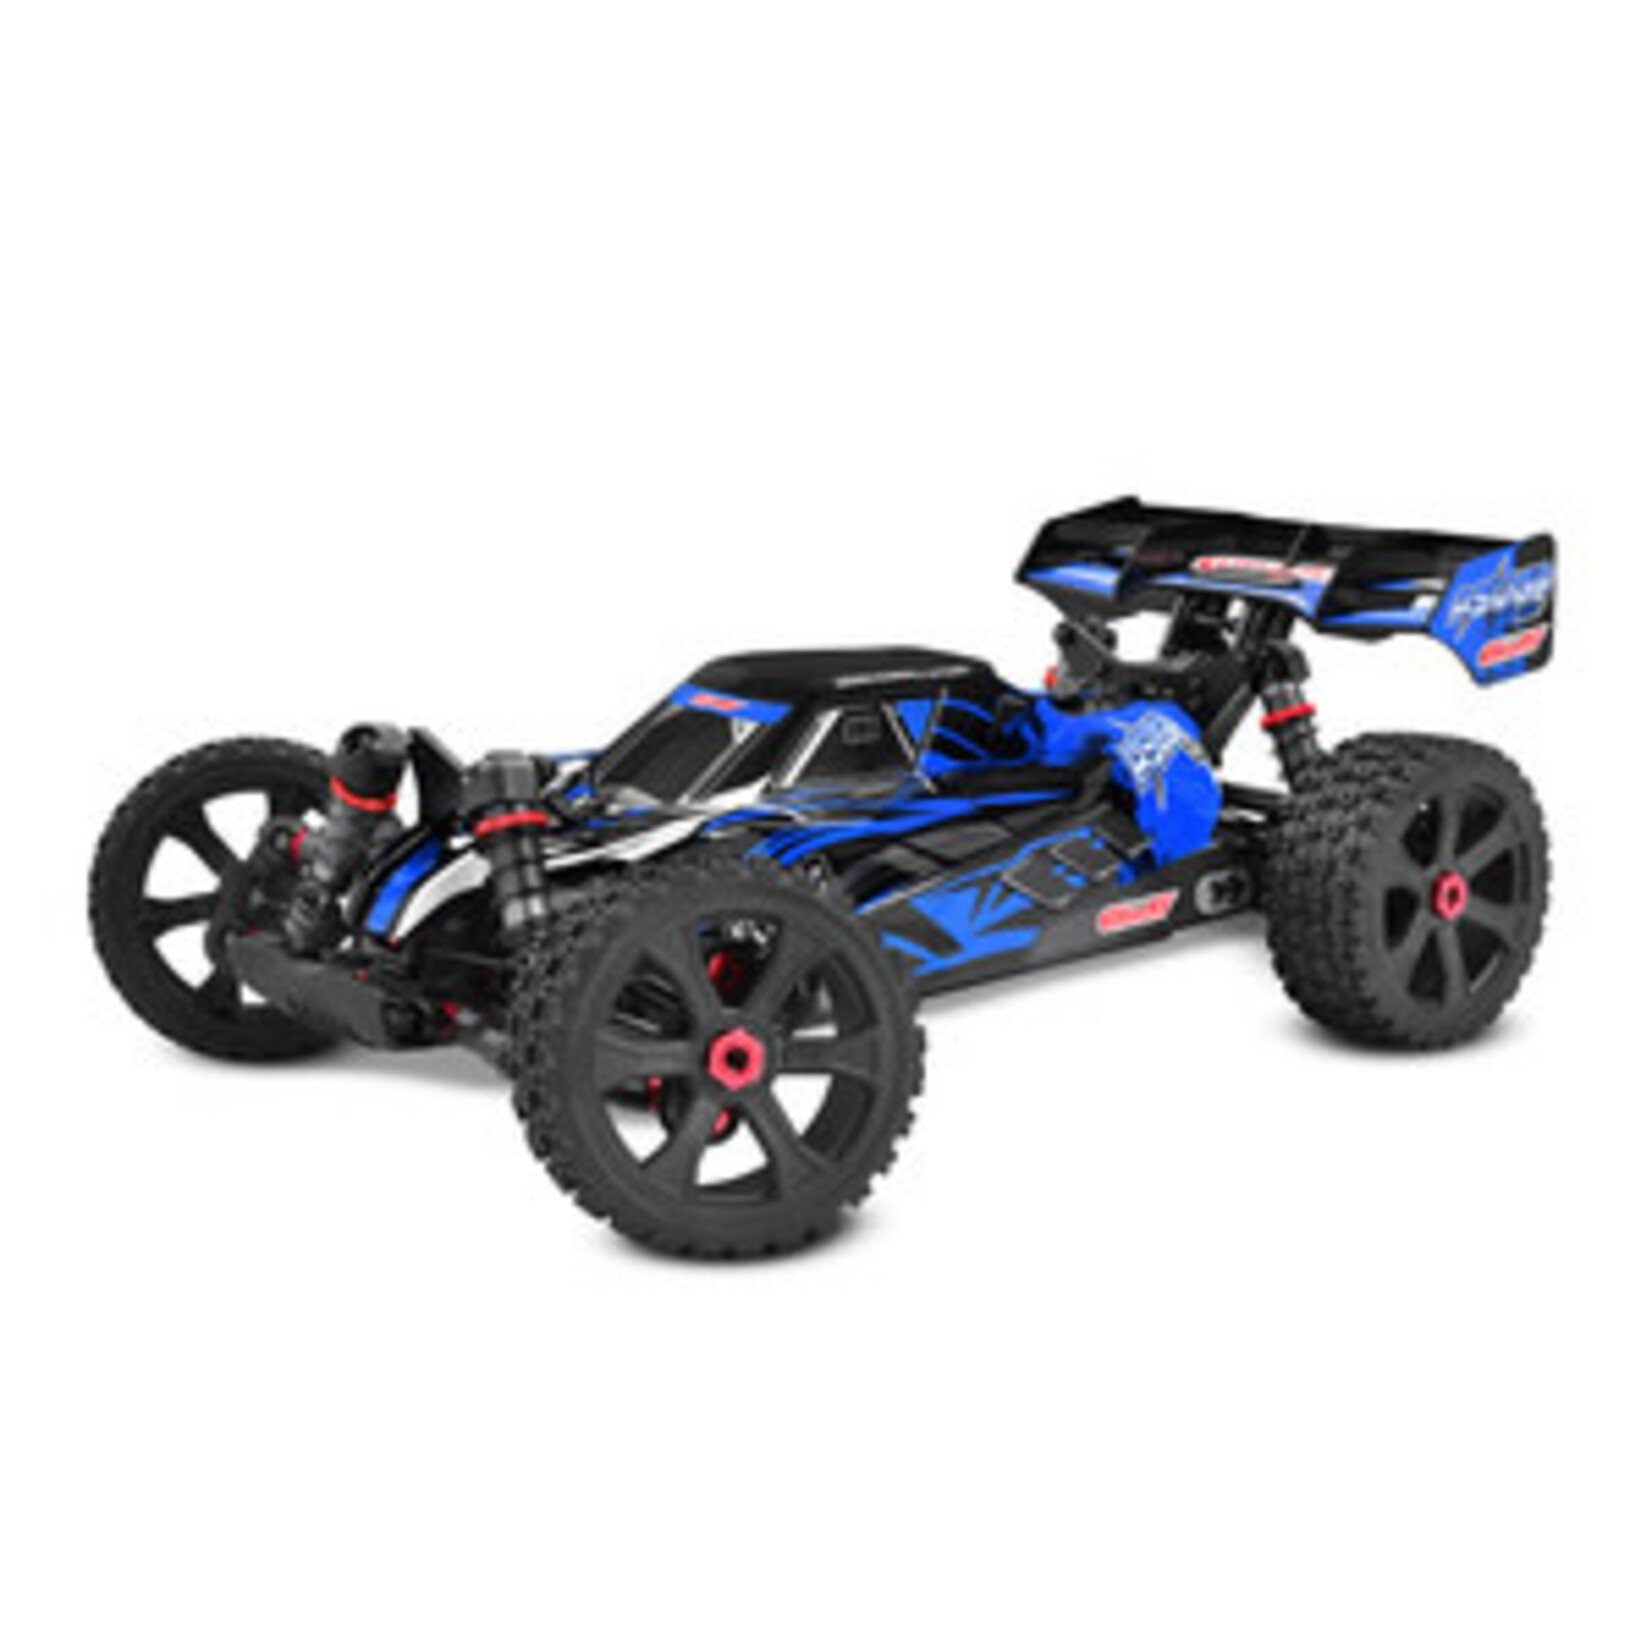 Corally Asuga XLR 6S RTR Racing Buggy - Blue, Large Scale